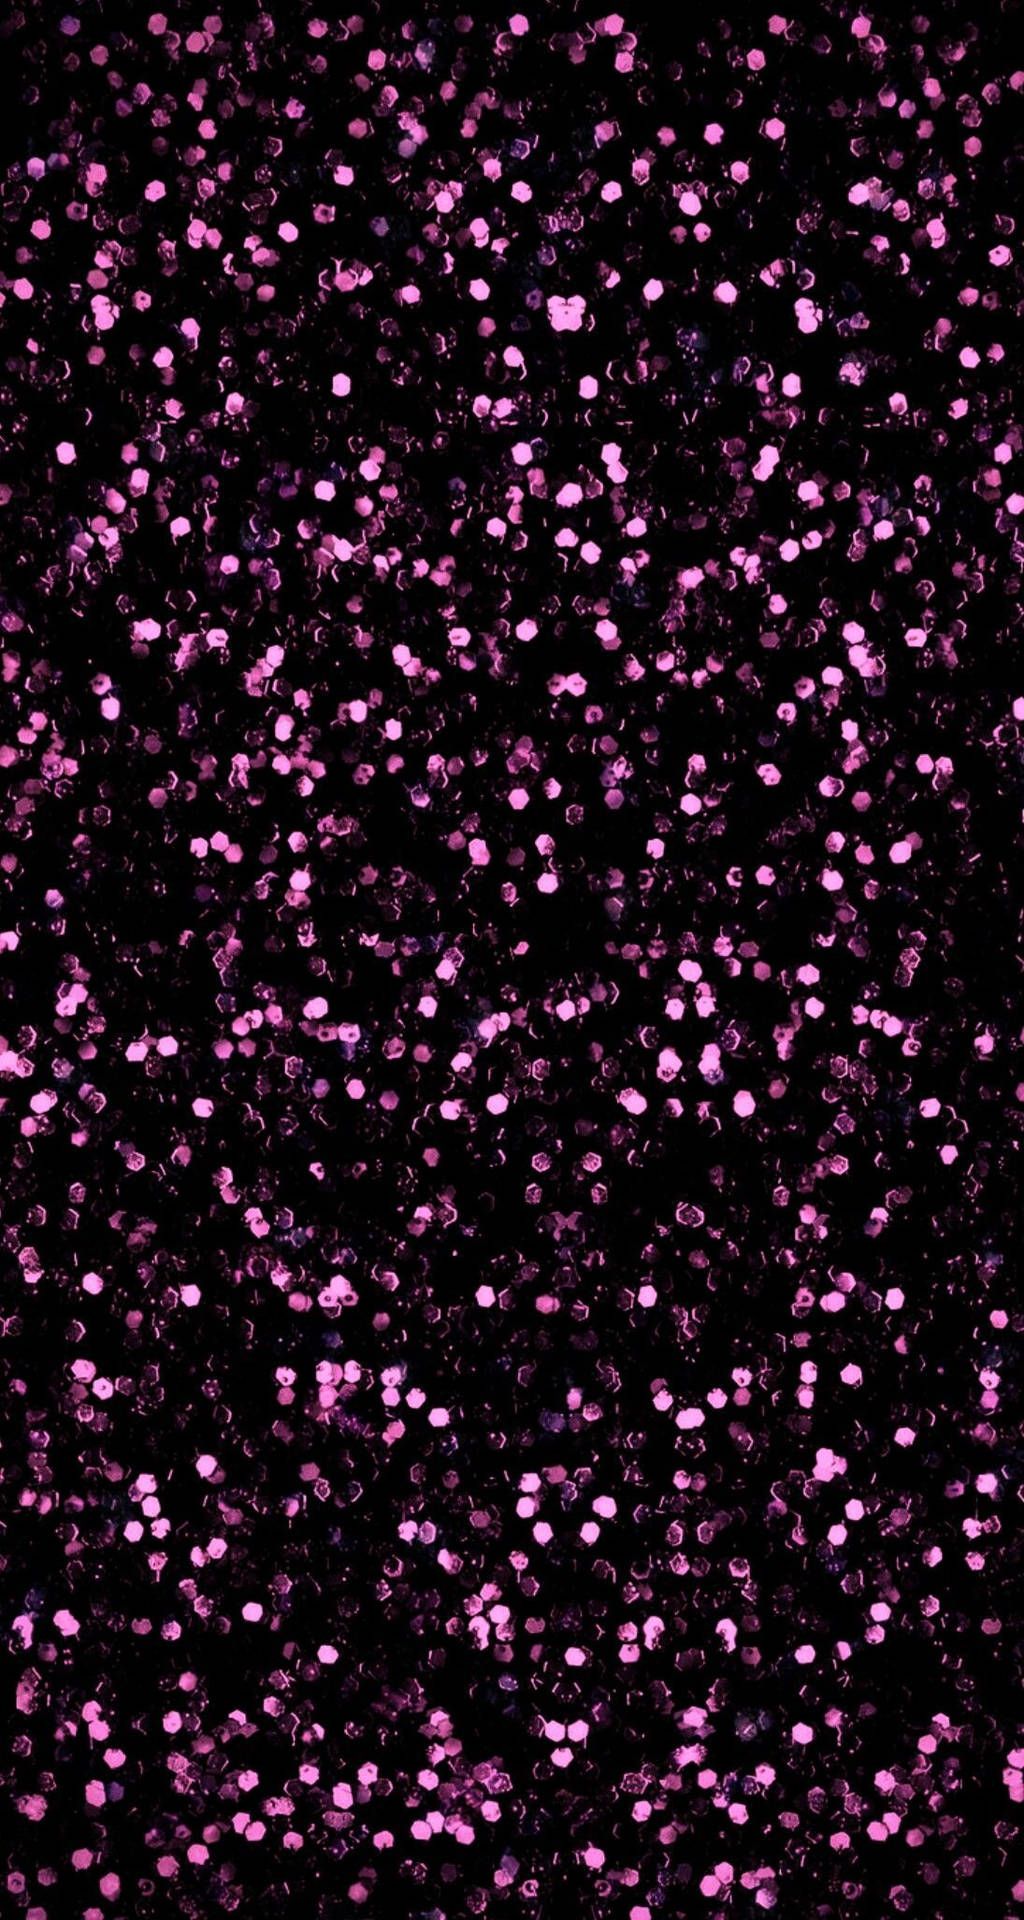 Black and pink glitter wallpaper for your phone - Glitter